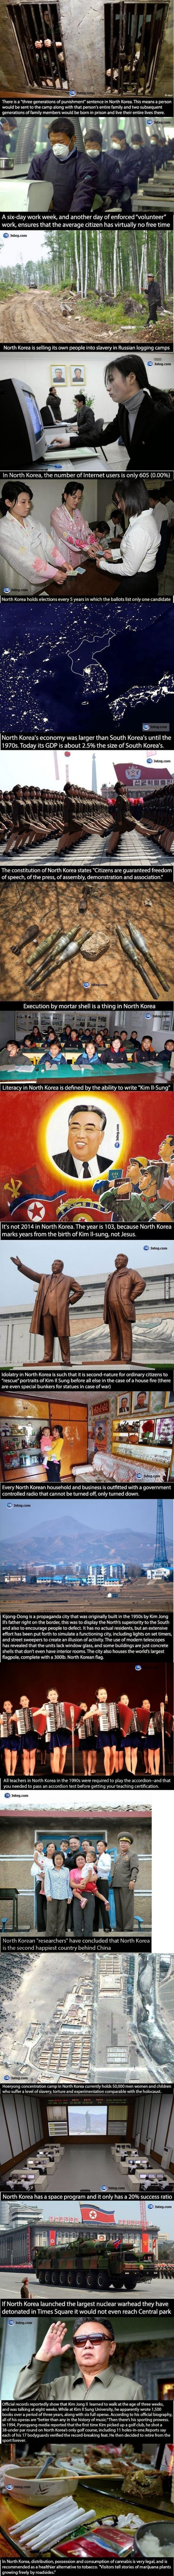 16 Shocking Facts About North Korea You Probably DIdn't Know